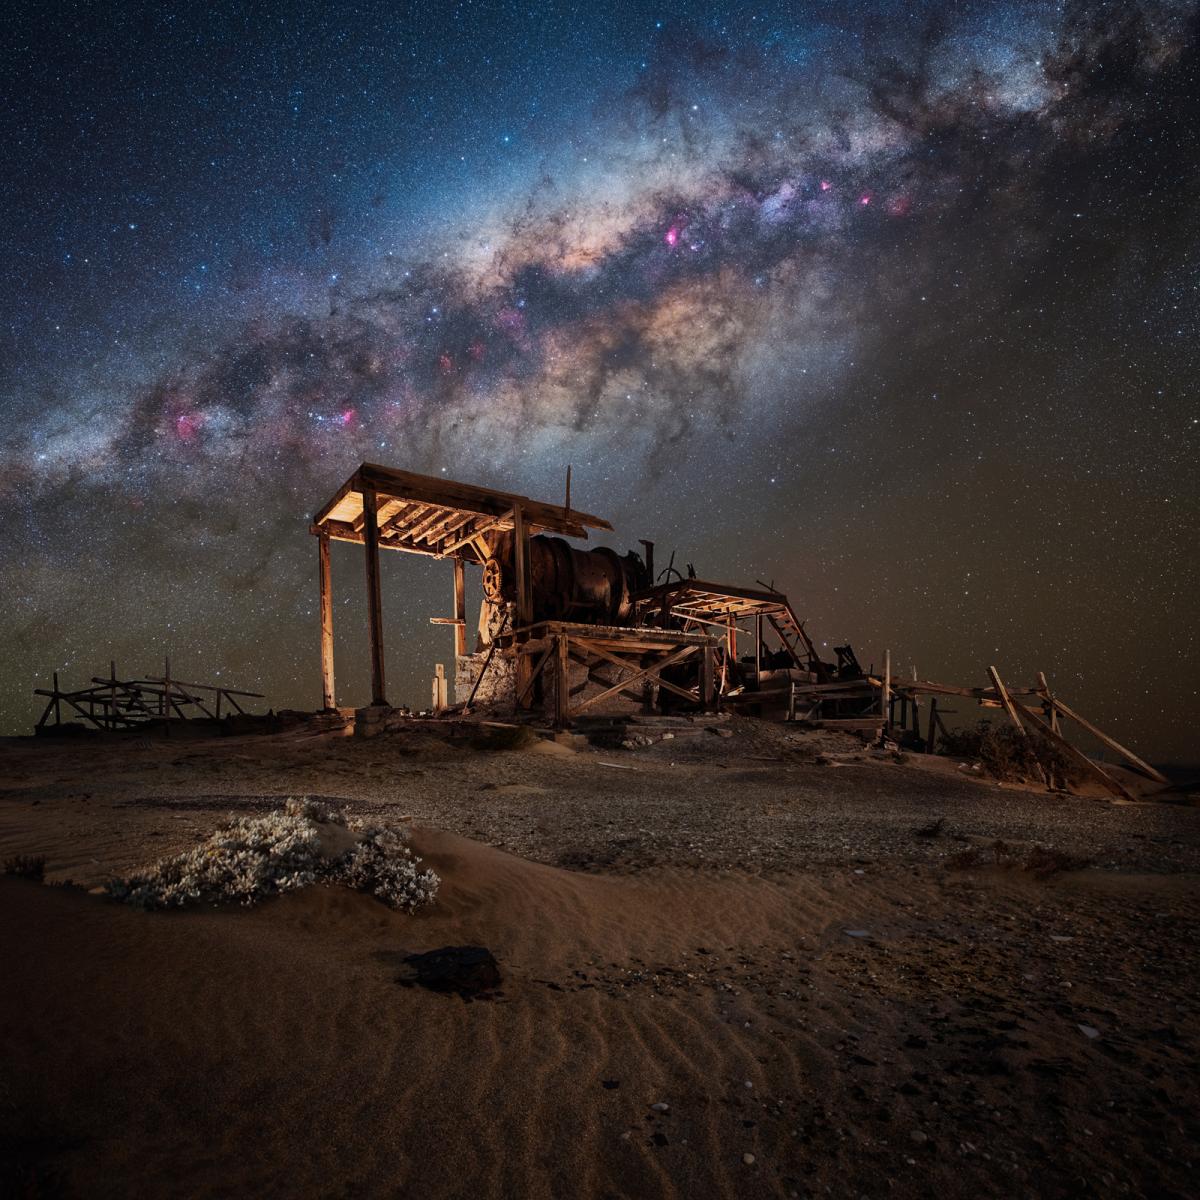 Image of decayed diamond mining processing plant with the Milky Way stretching out in the sky behind it